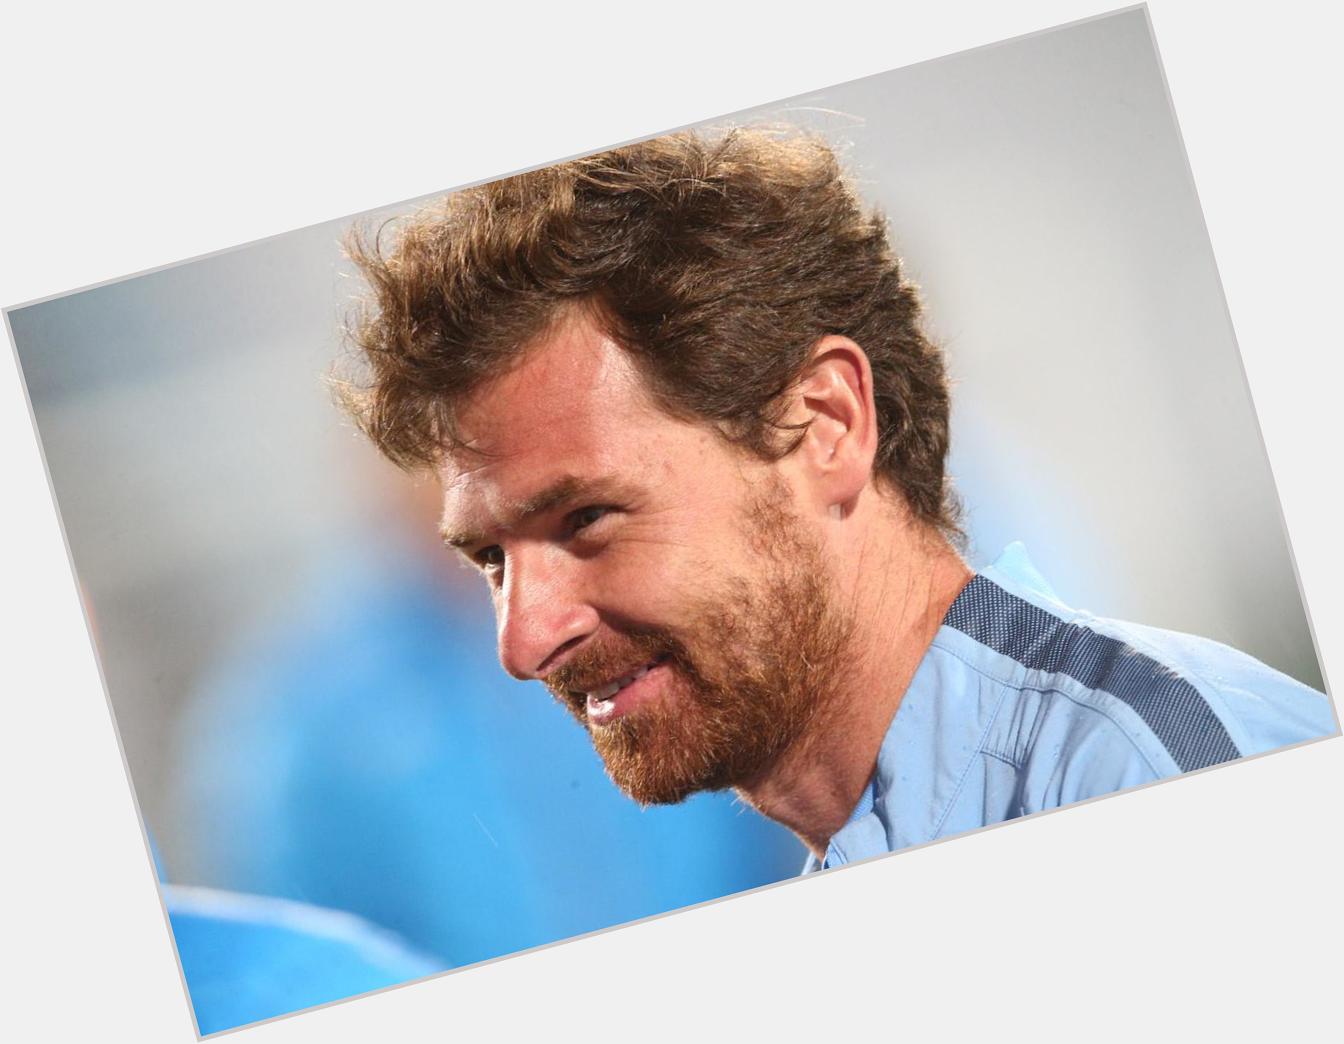 Happy 38th Birthday to our manager André Villas-Boas!!!! Many happy returns from all at Zenit! 